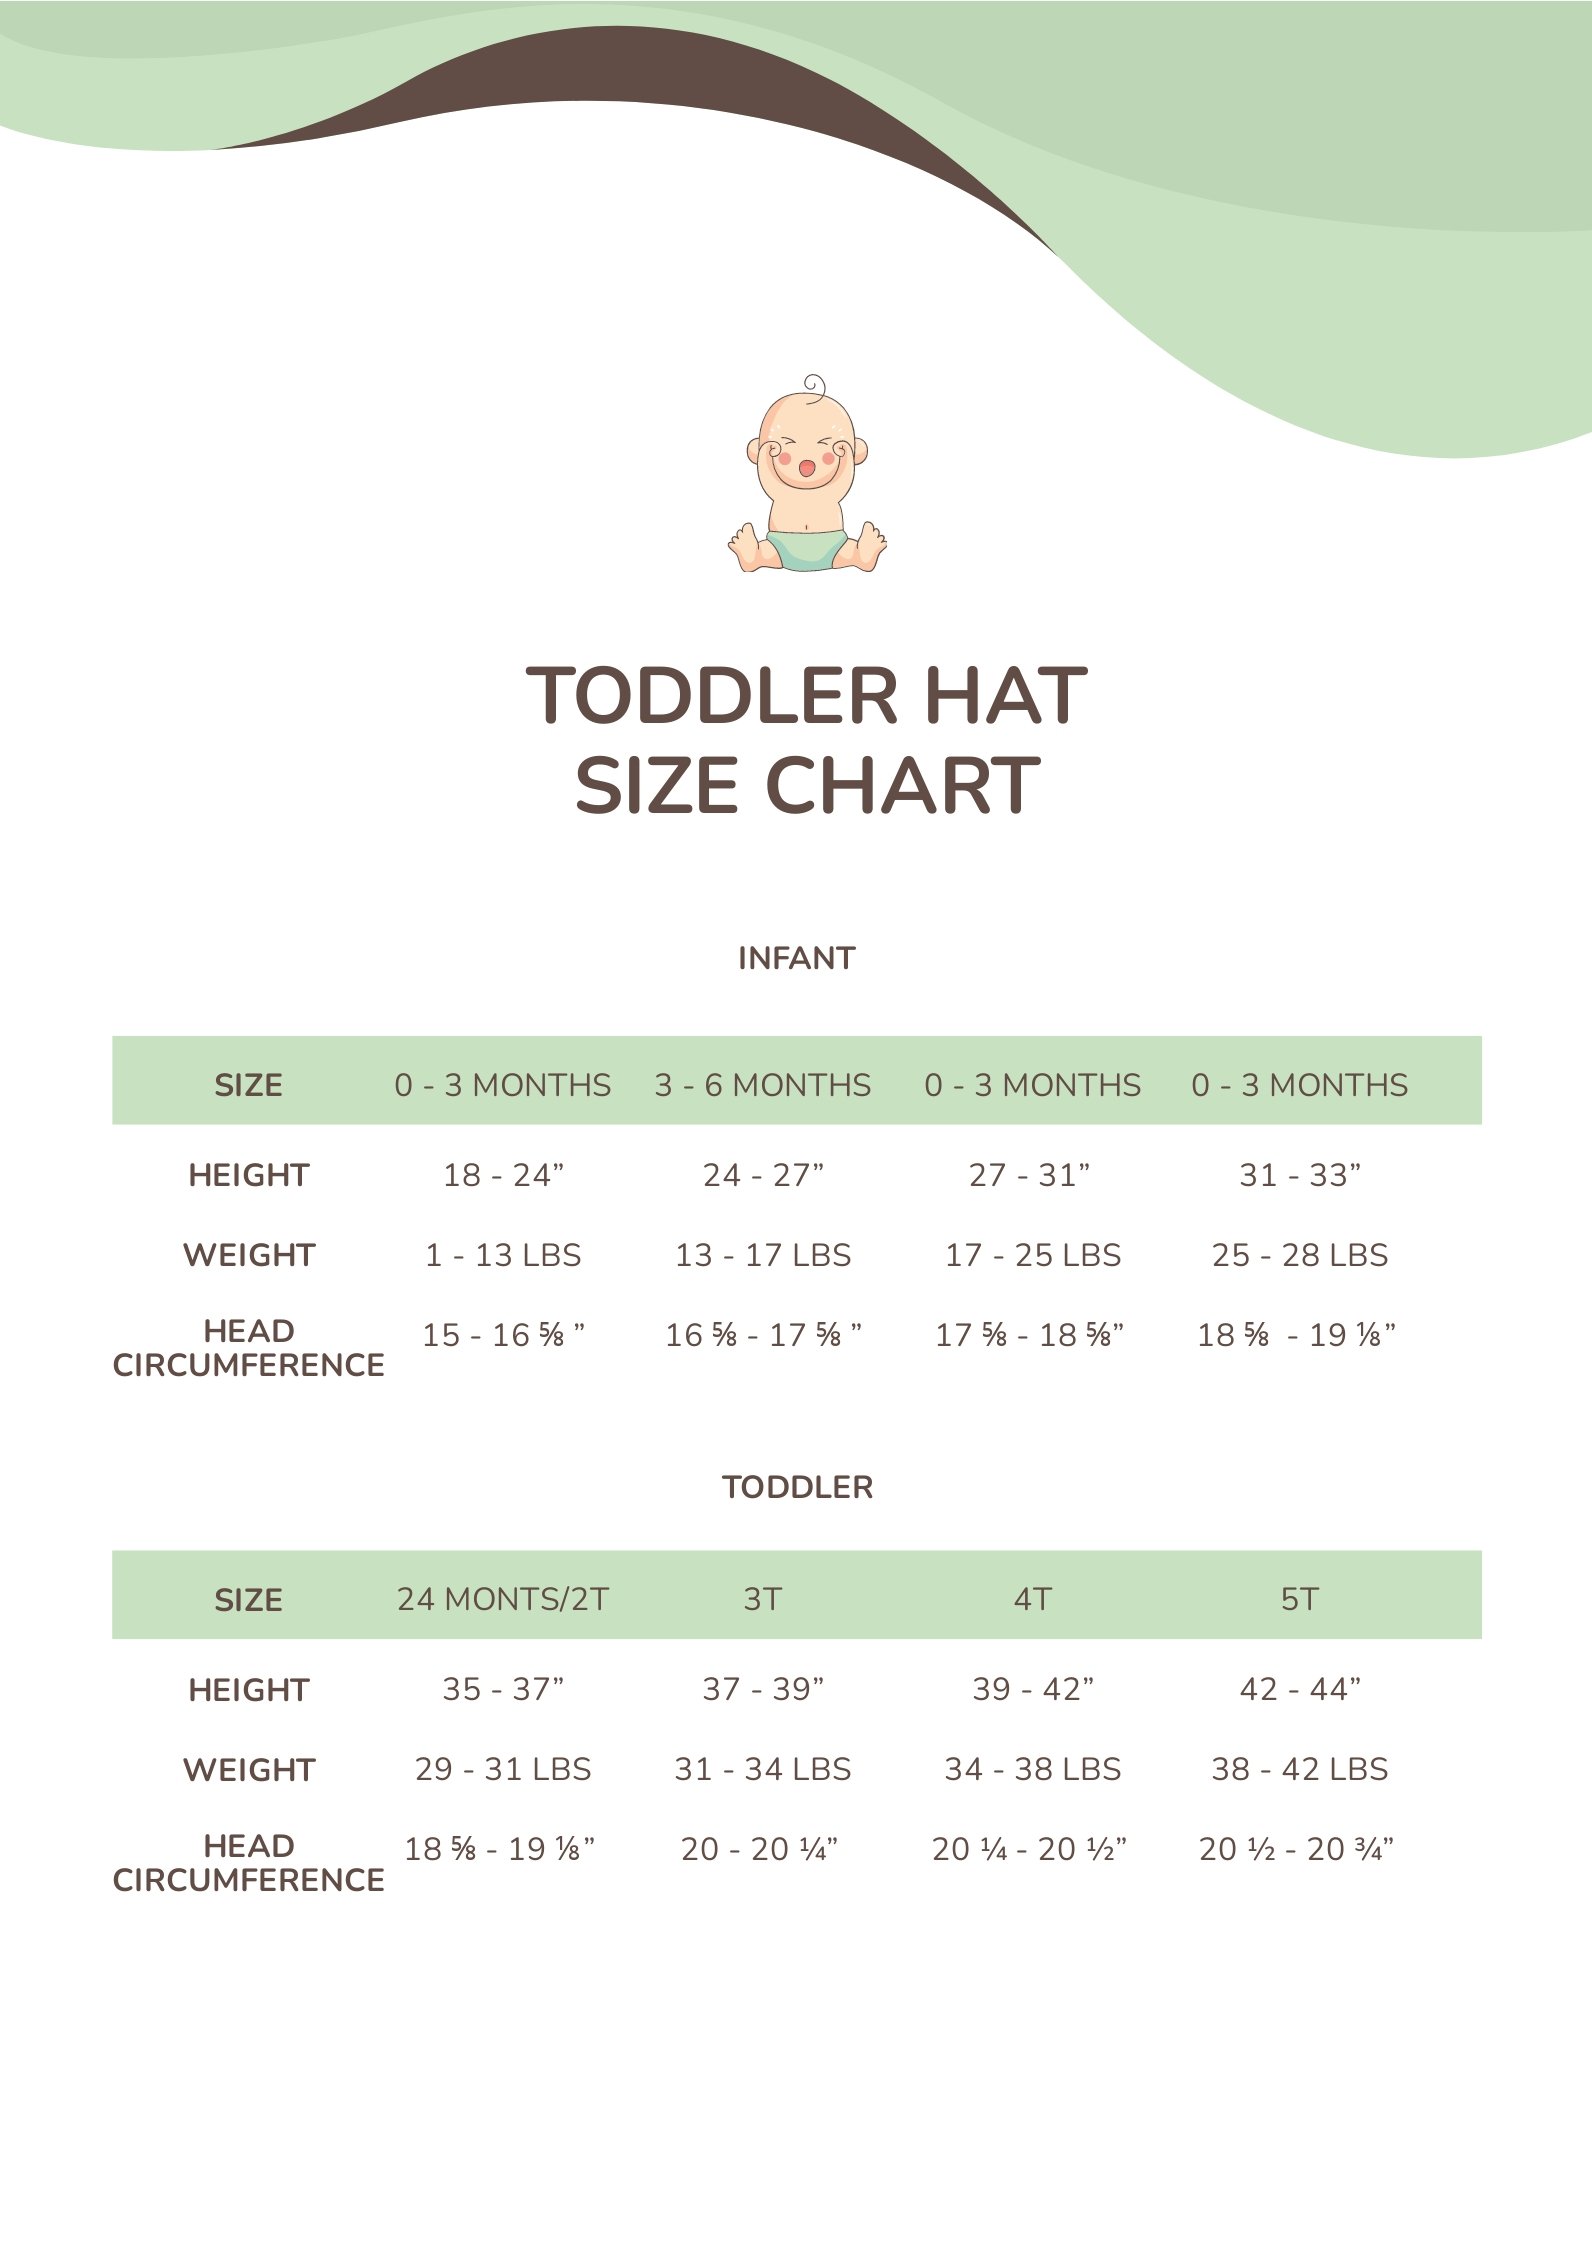 Cowboy Hat Size Chart in PDF - Download | Template.net